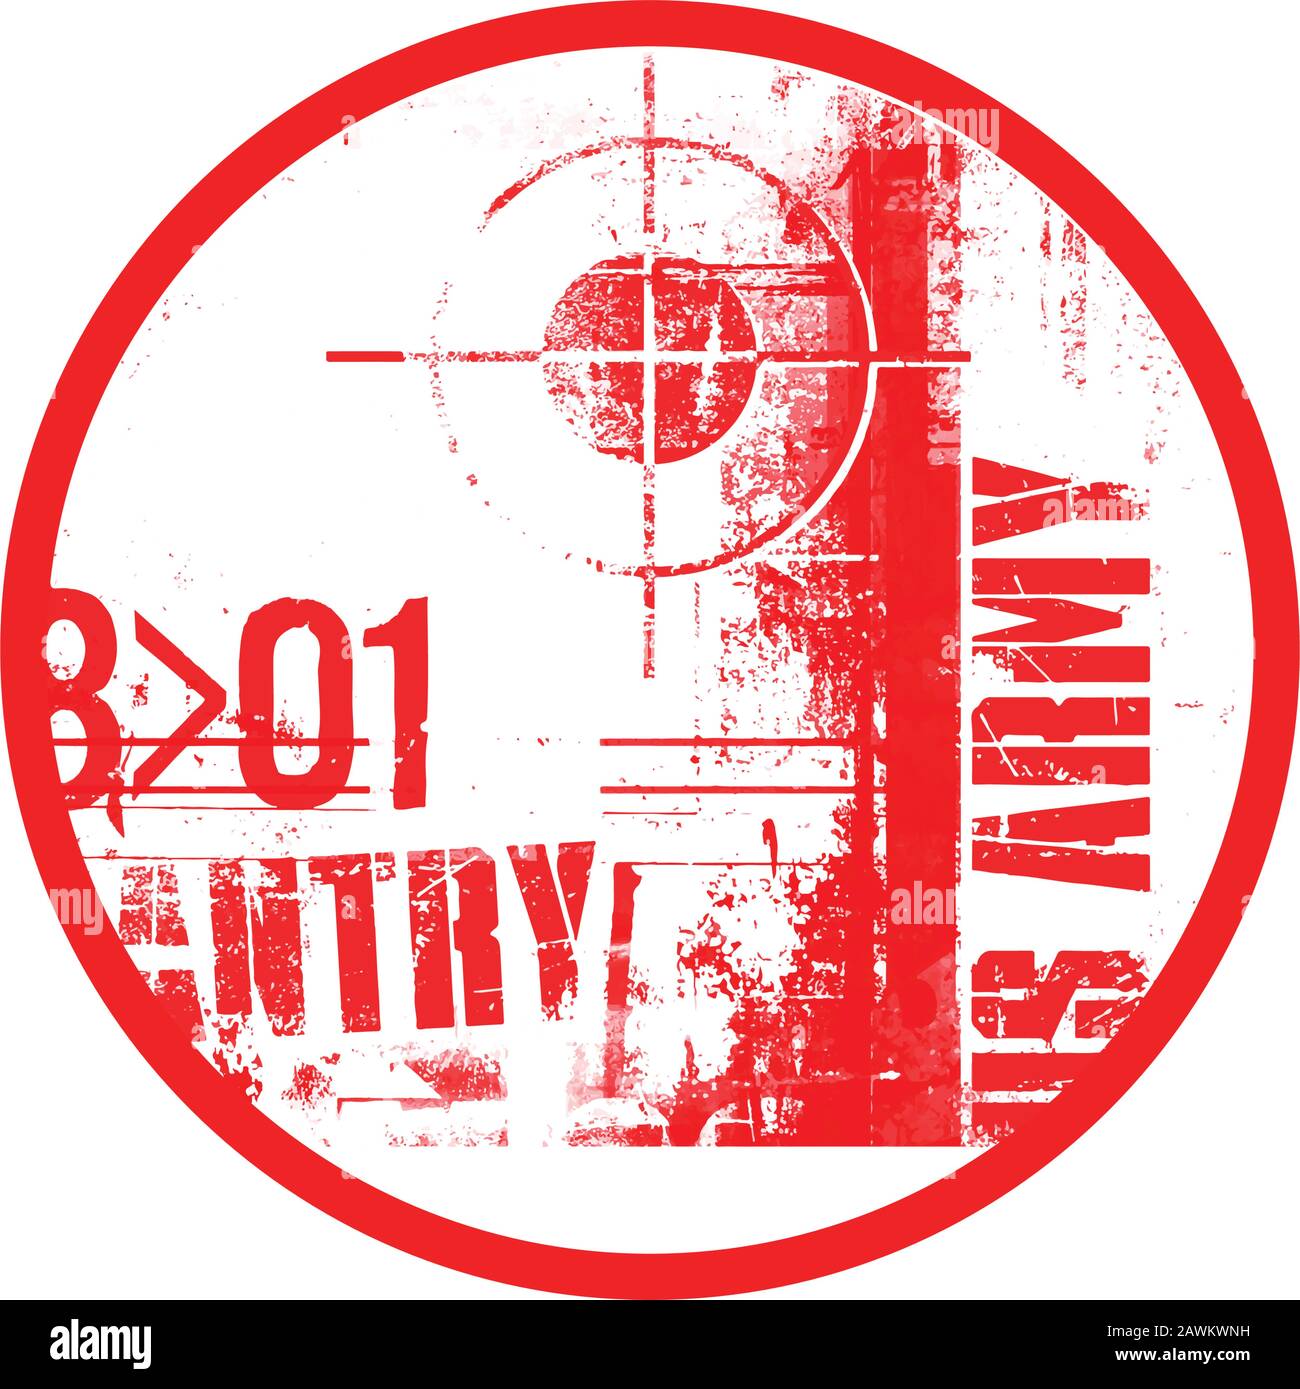 Crosshair sign on old grungy surface. Rifle scope symbol. Target mark. Us army text Stock Vector